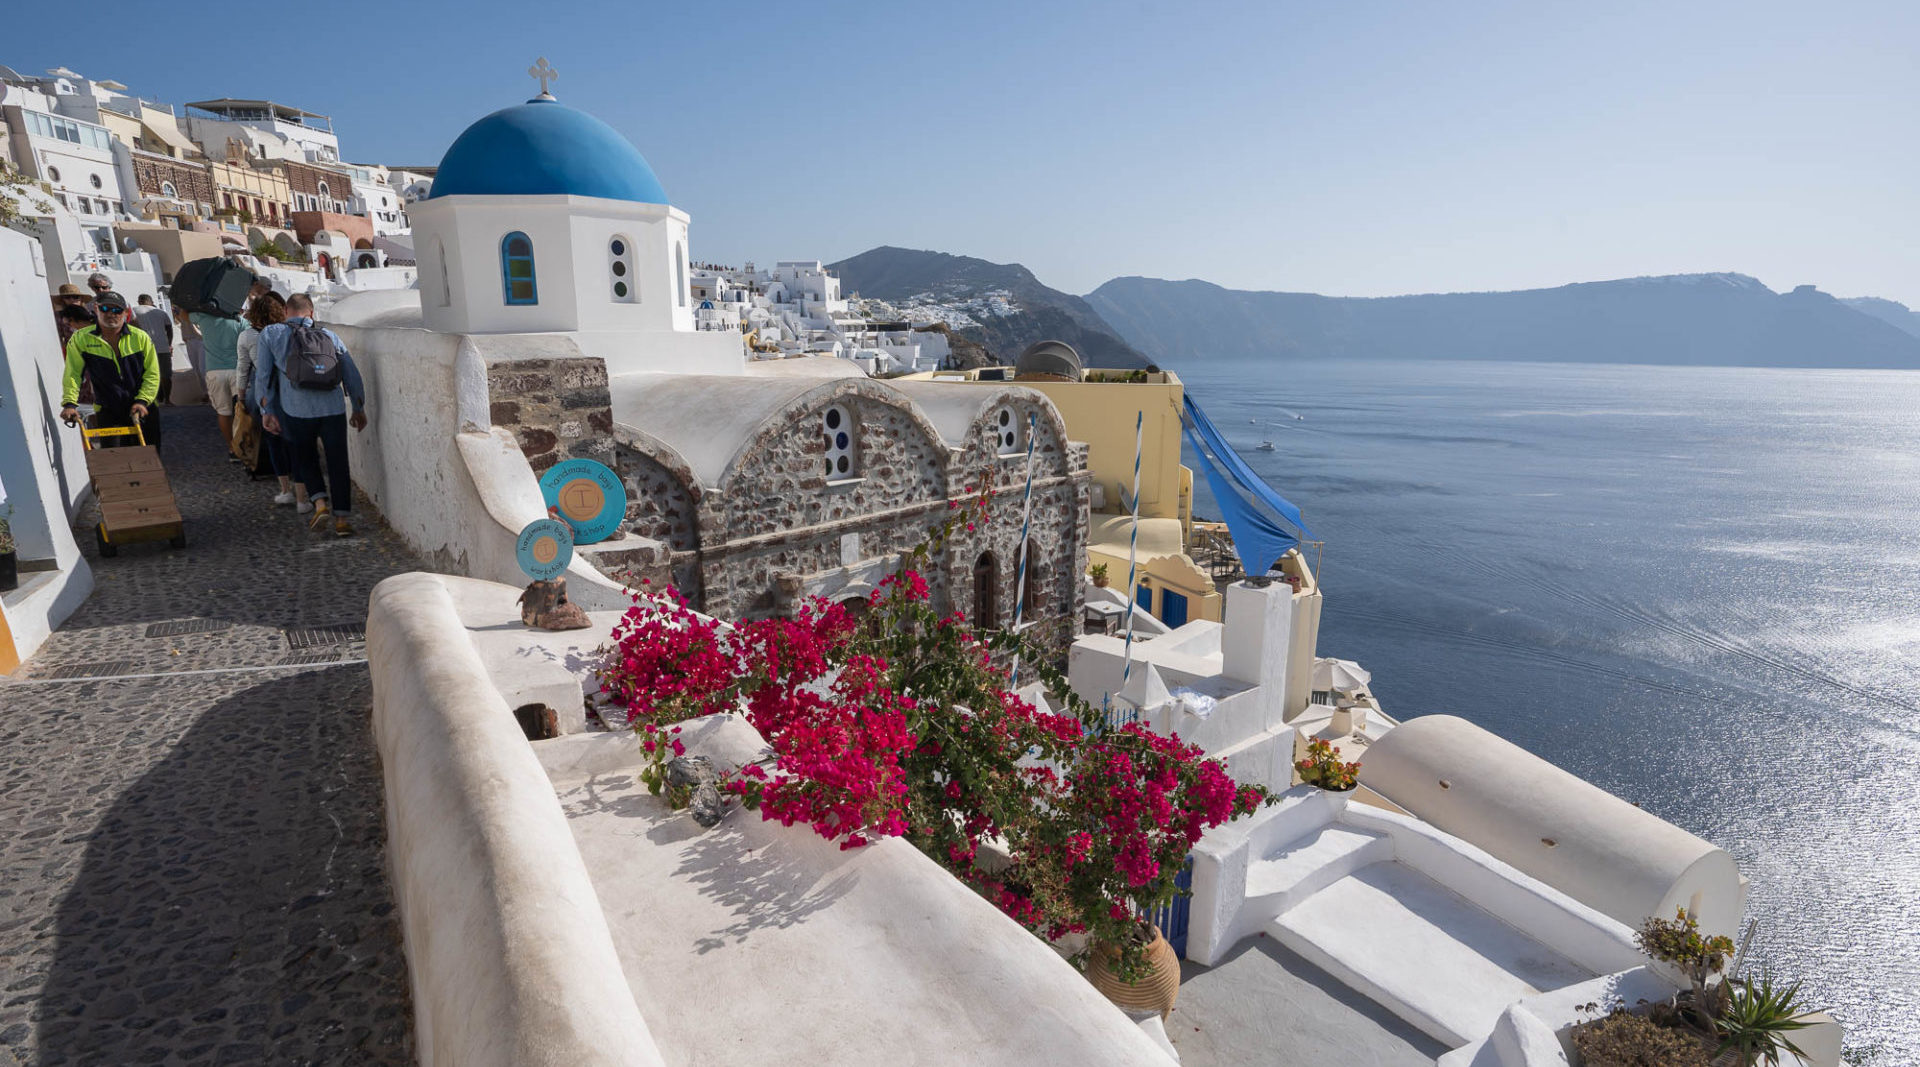 You’ll Fall in Love with these Aegean Sea Islands